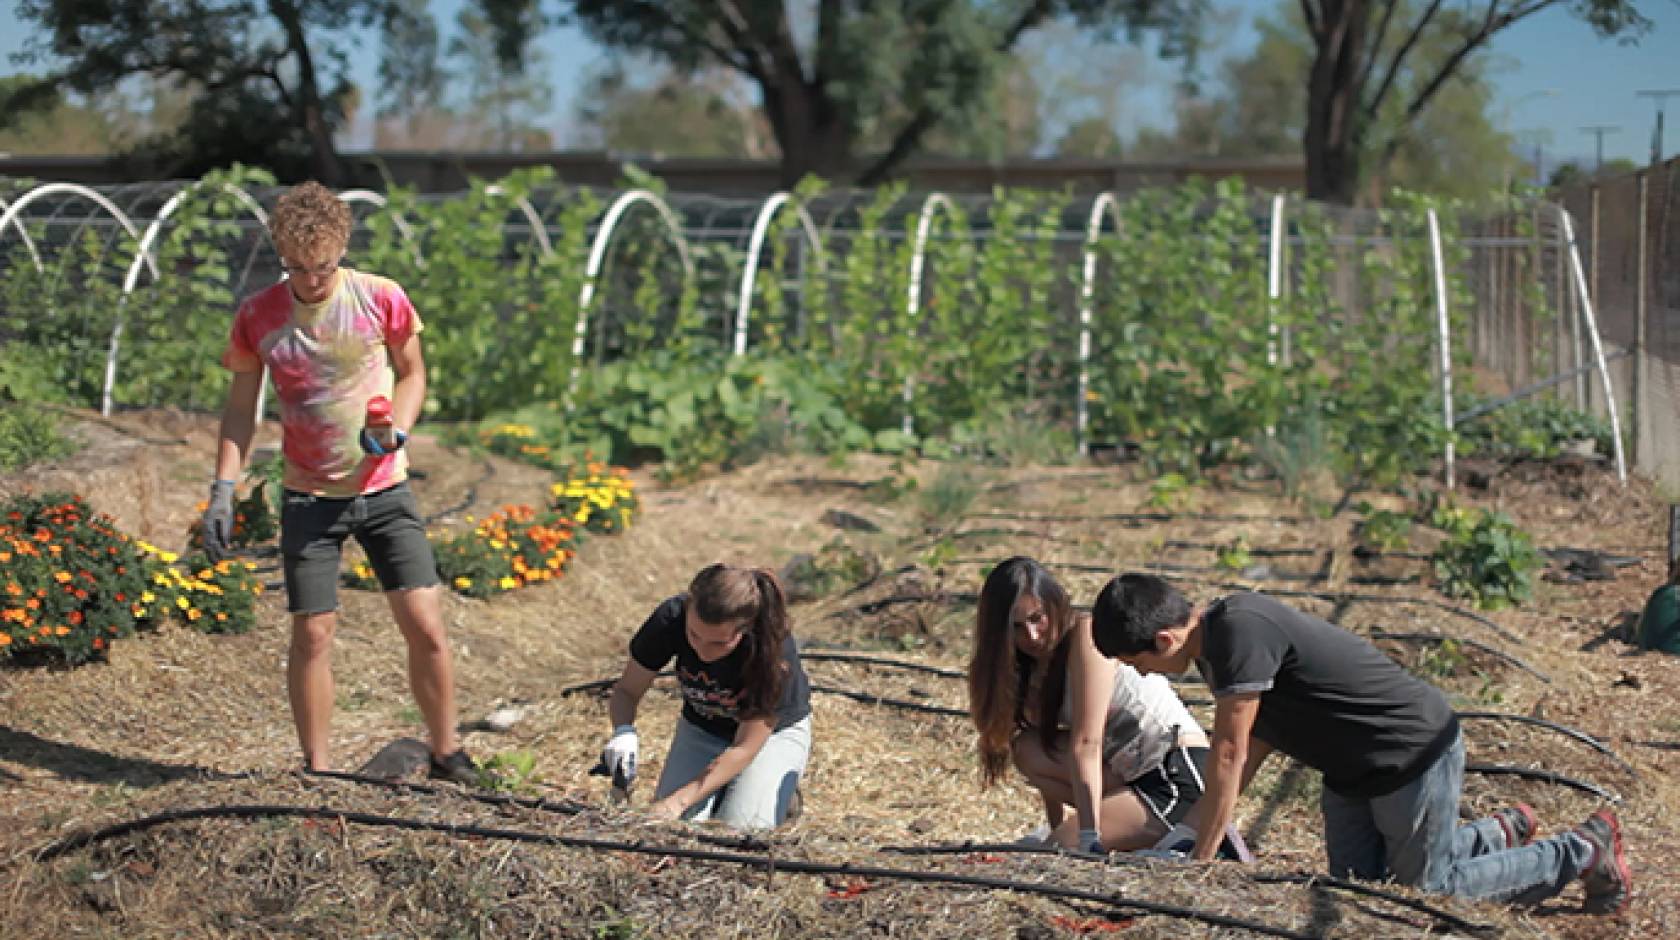 Students taking a new course on food justice at UCLA learn about the topic from the ground up. The course is part of a new food studies minor, one of a growing number of interdisciplinary programs that have become popular to take.